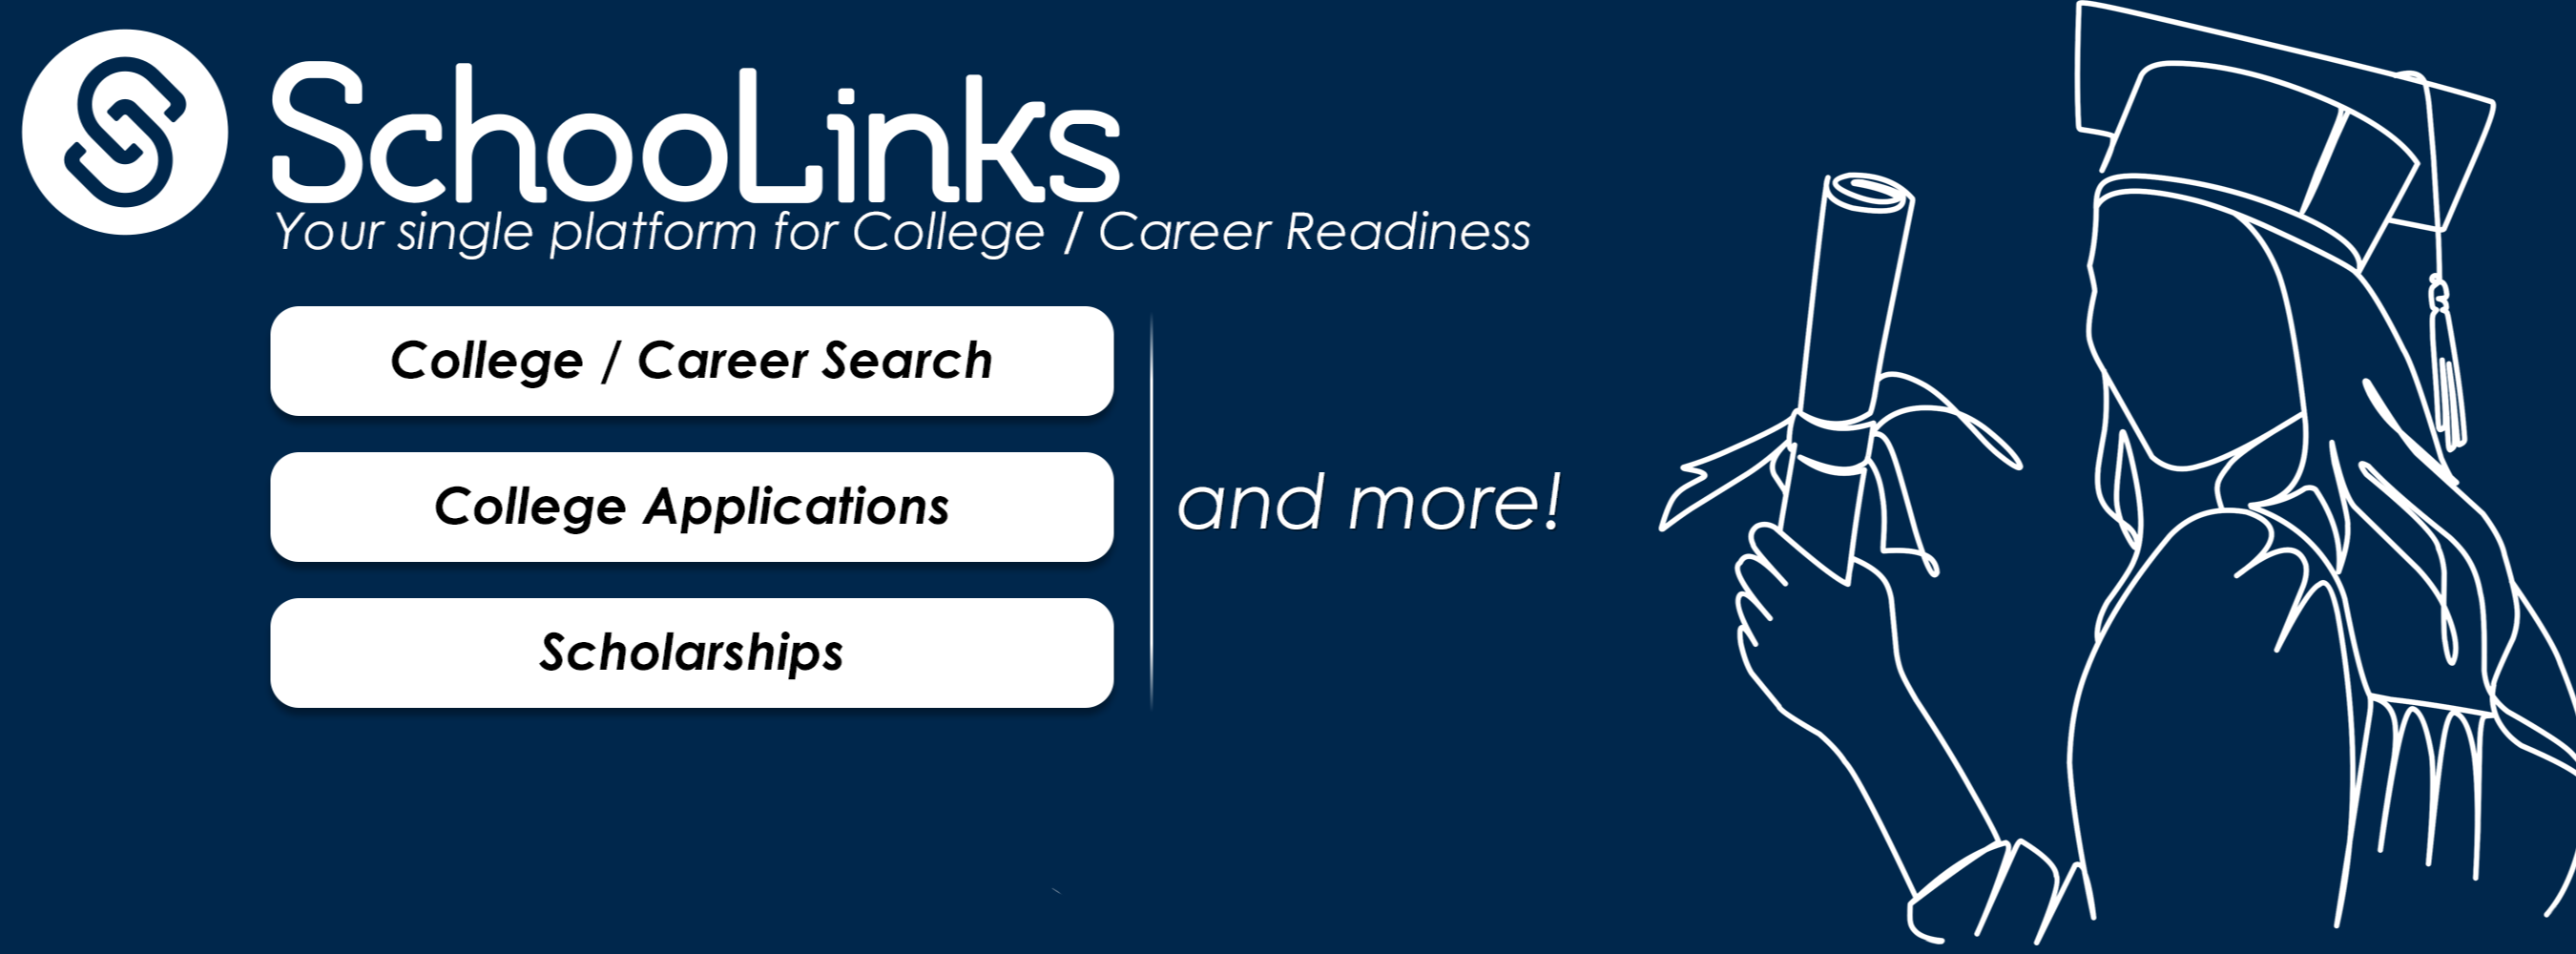 SchooLinks, your single platform for college / career readiness. College / career search, college applications, scholarships, and more.